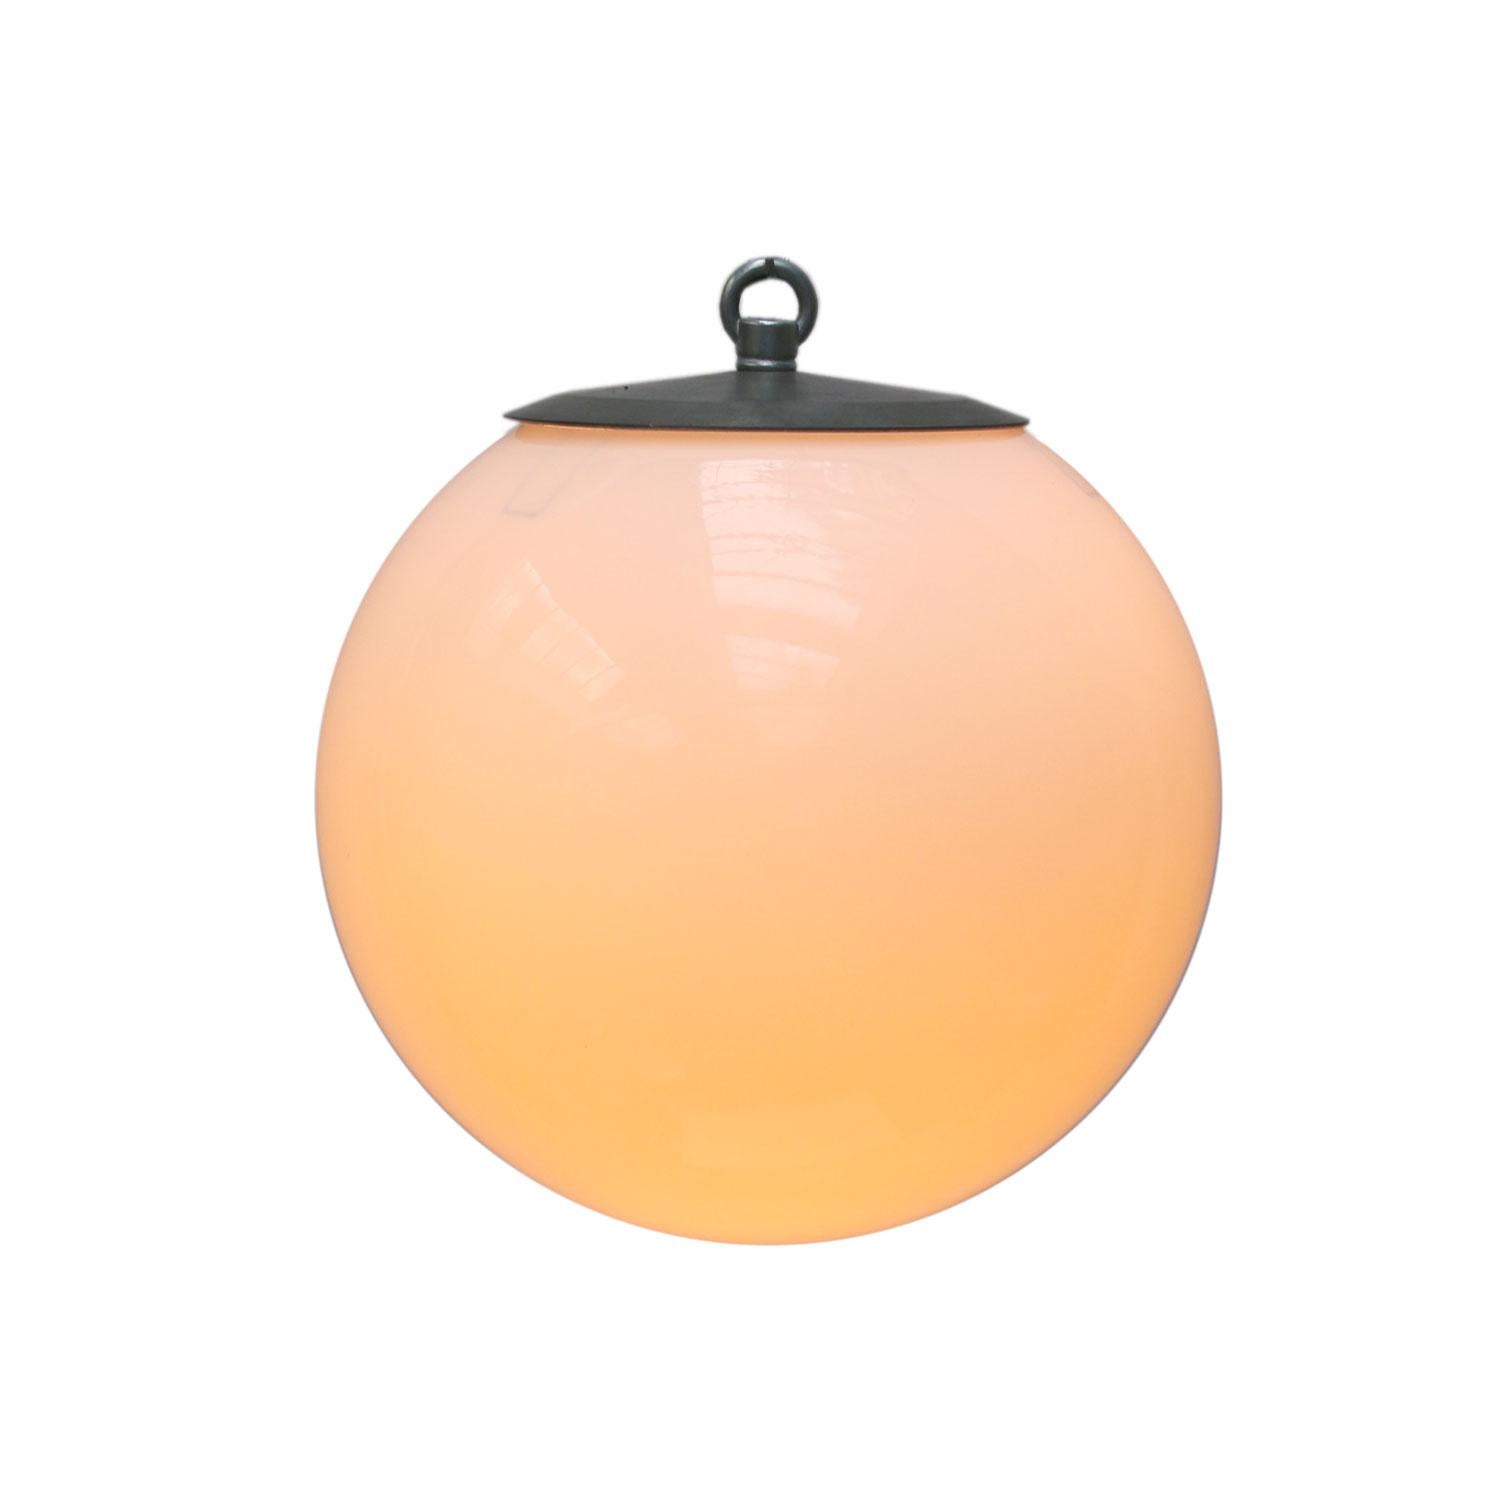 Opaline glass pendant.

Weight: 2.00 kg / 4.4 lb

Priced per individual item. All lamps have been made suitable by international standards for incandescent light bulbs, energy-efficient and LED bulbs. E26/E27 bulb holders and new wiring are CE